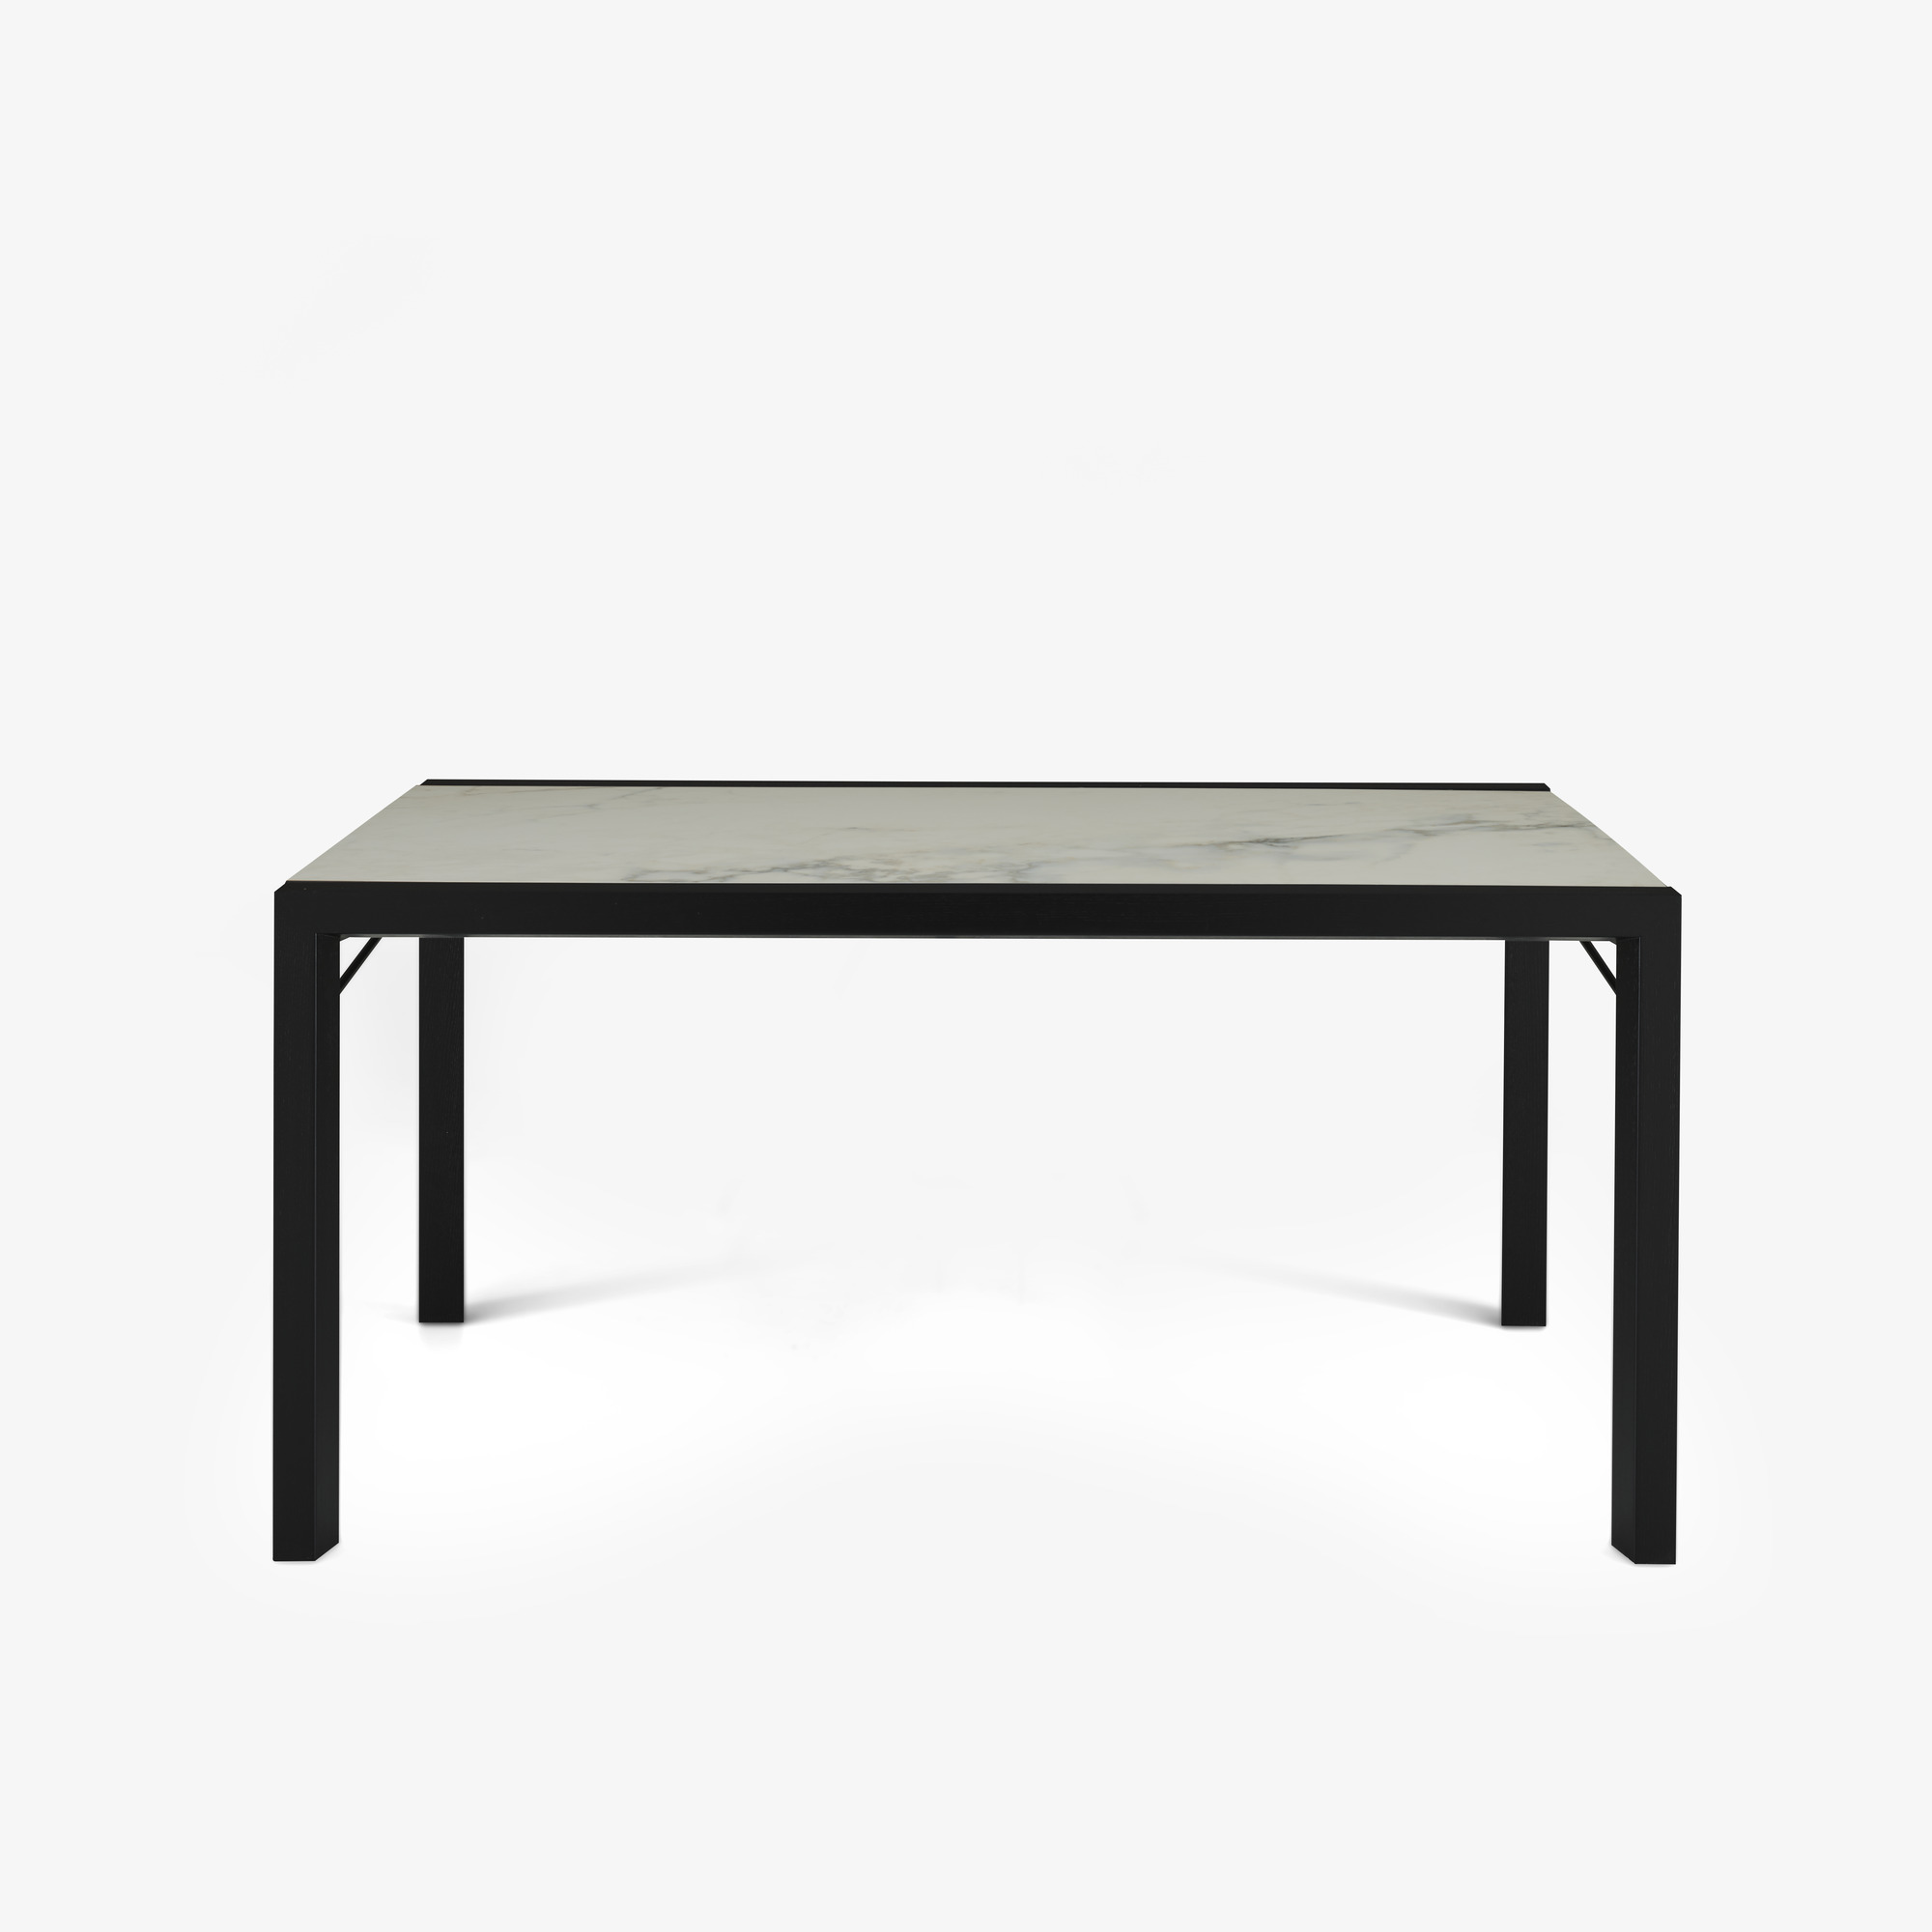 Image DINING TABLE TOP IN WHITE MARBLE-EFFECT CERAMIC STONEWARE BASE IN BLACK STAINED ASH